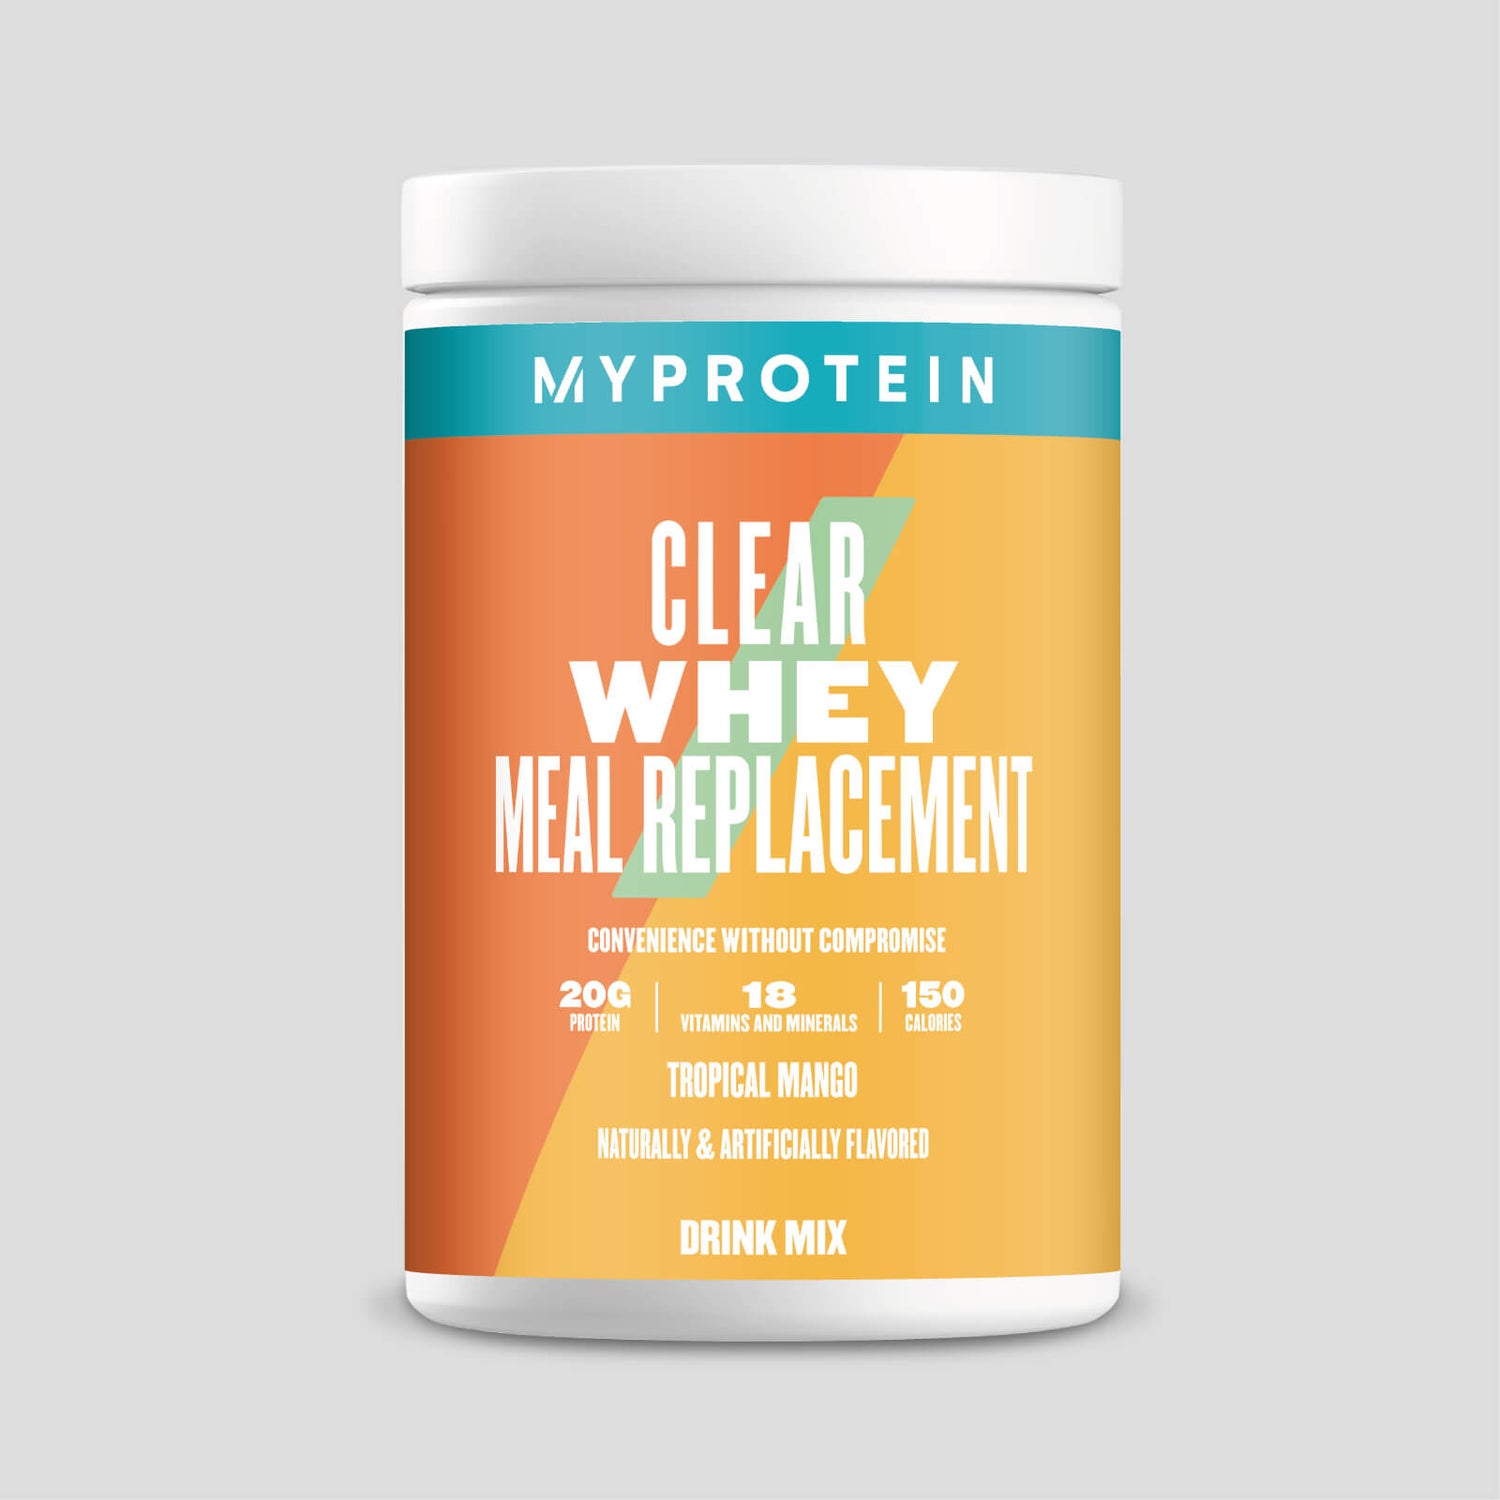 Clear Whey Meal Replacement - 1.35lb - Tropical Mango